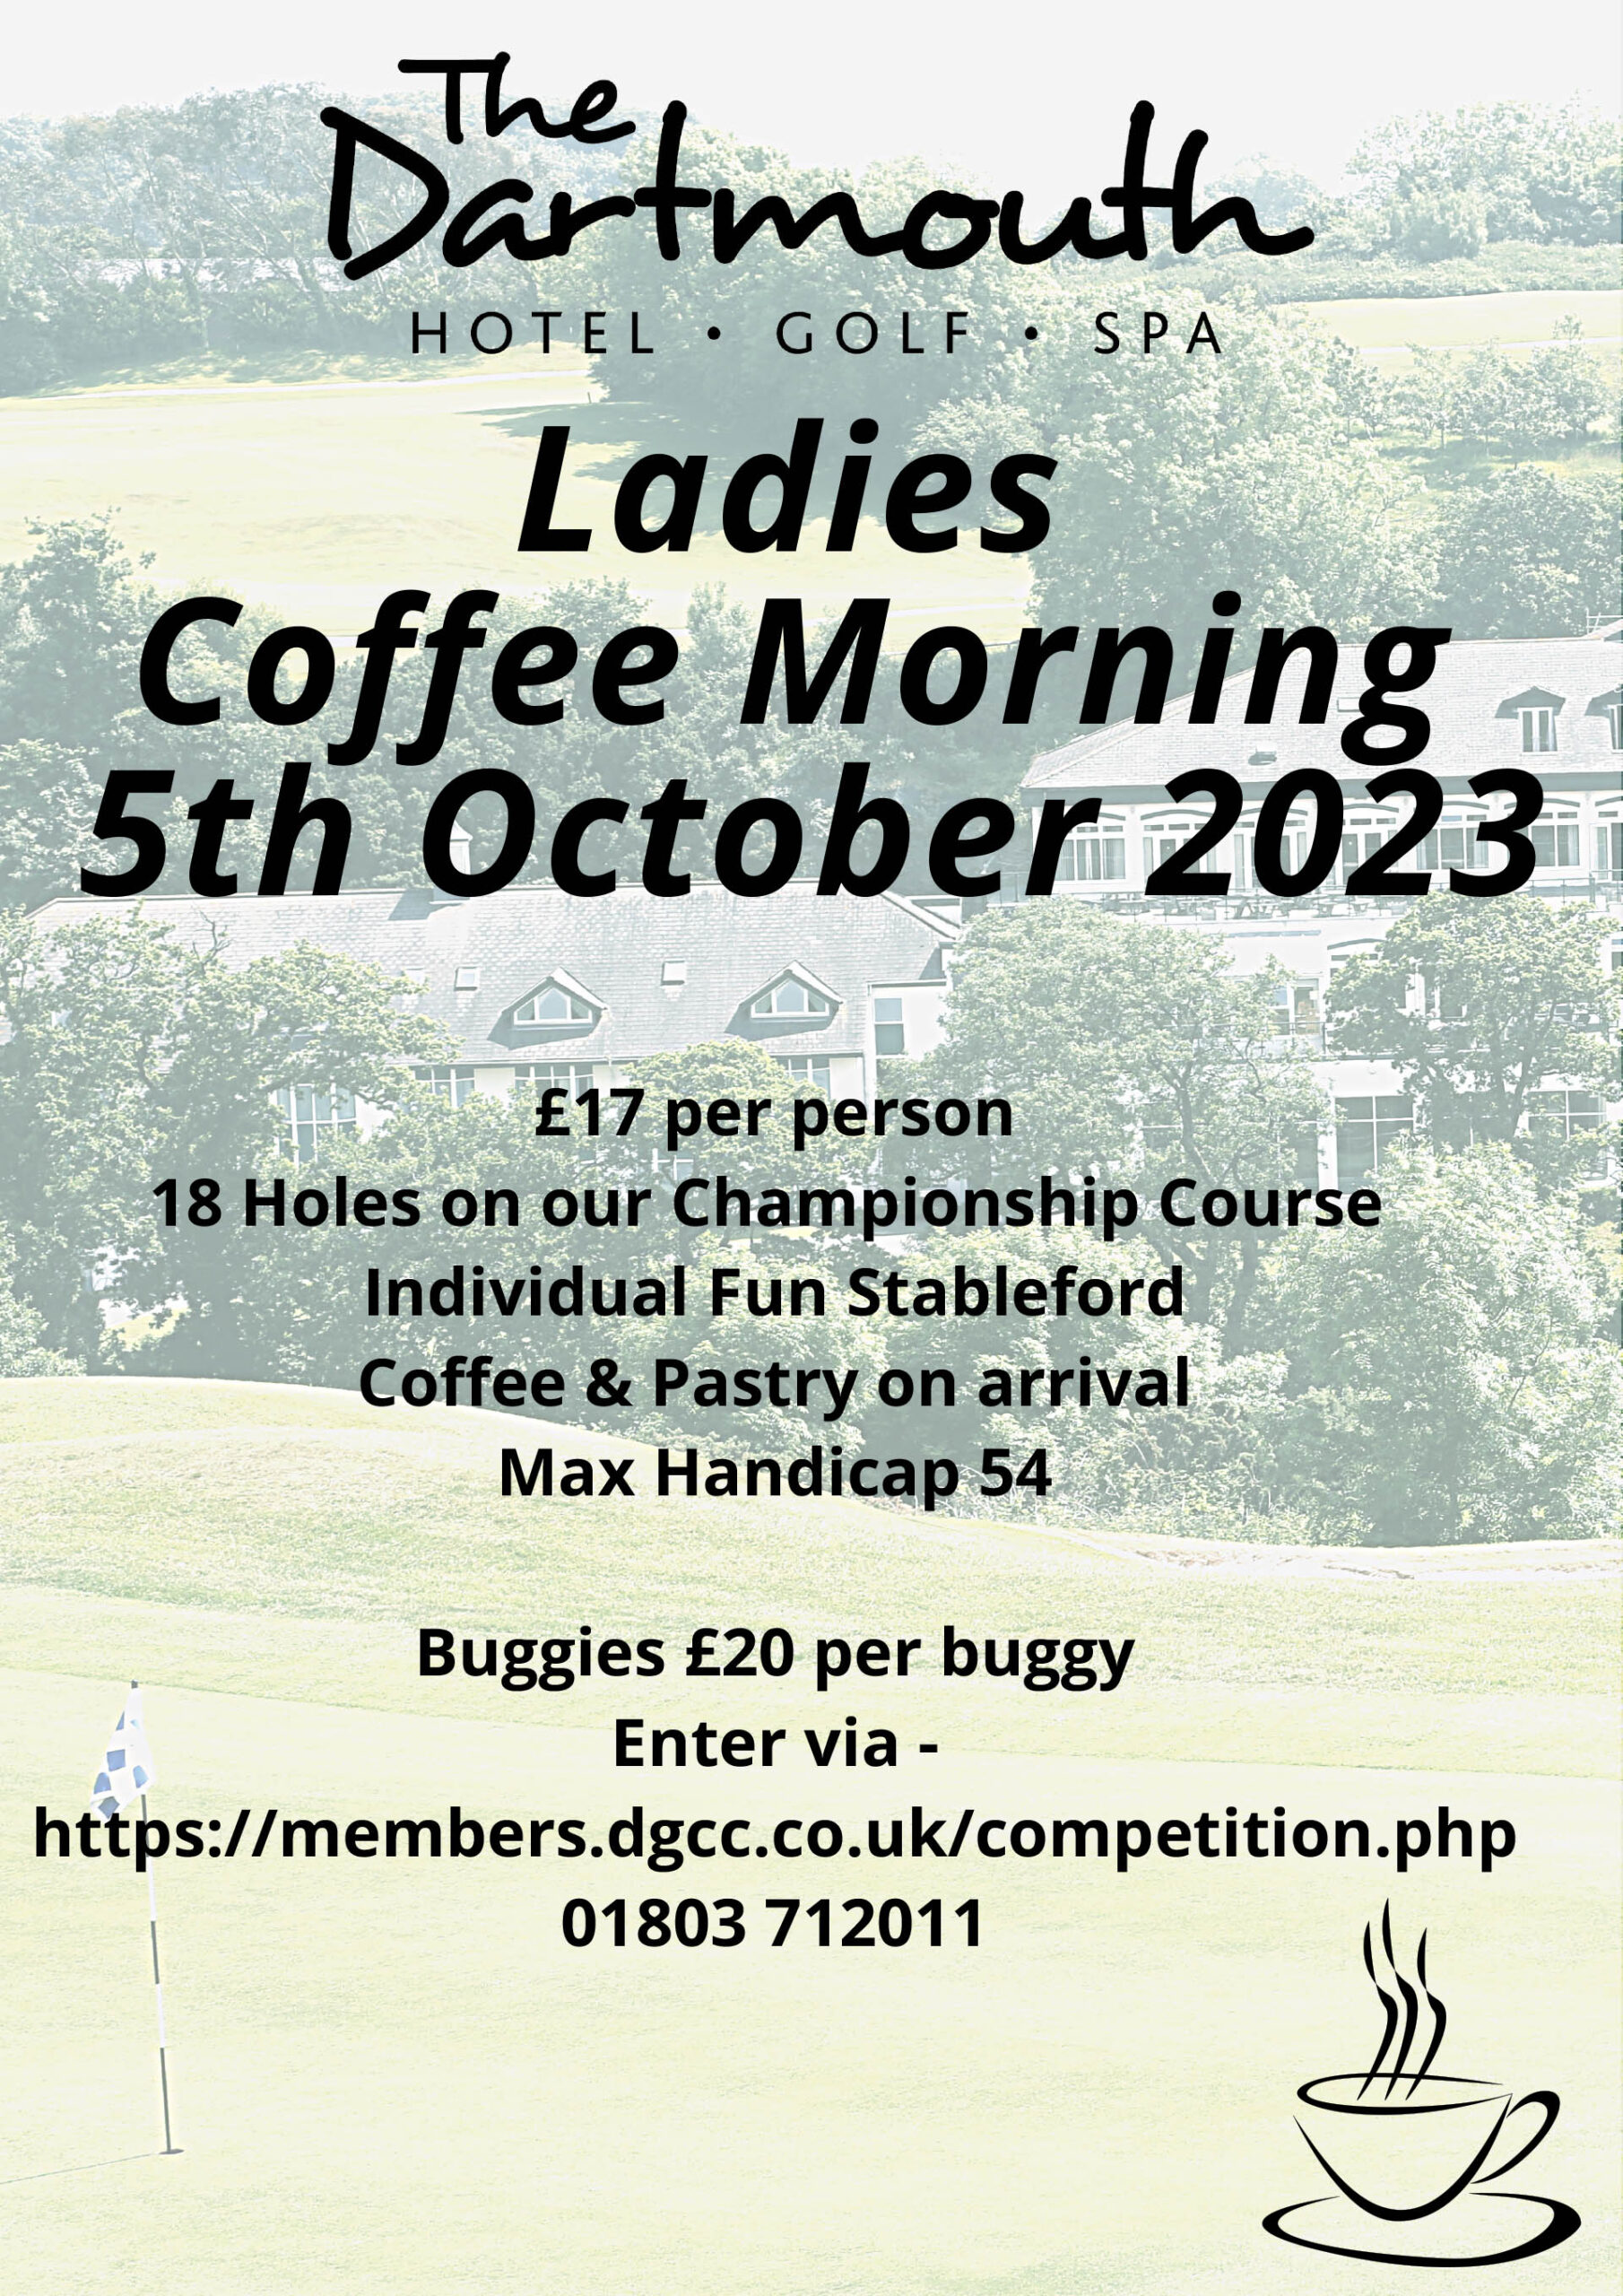 Ladies Coffee Morning Golf at The Dartmouth Hotel Golf & Spa